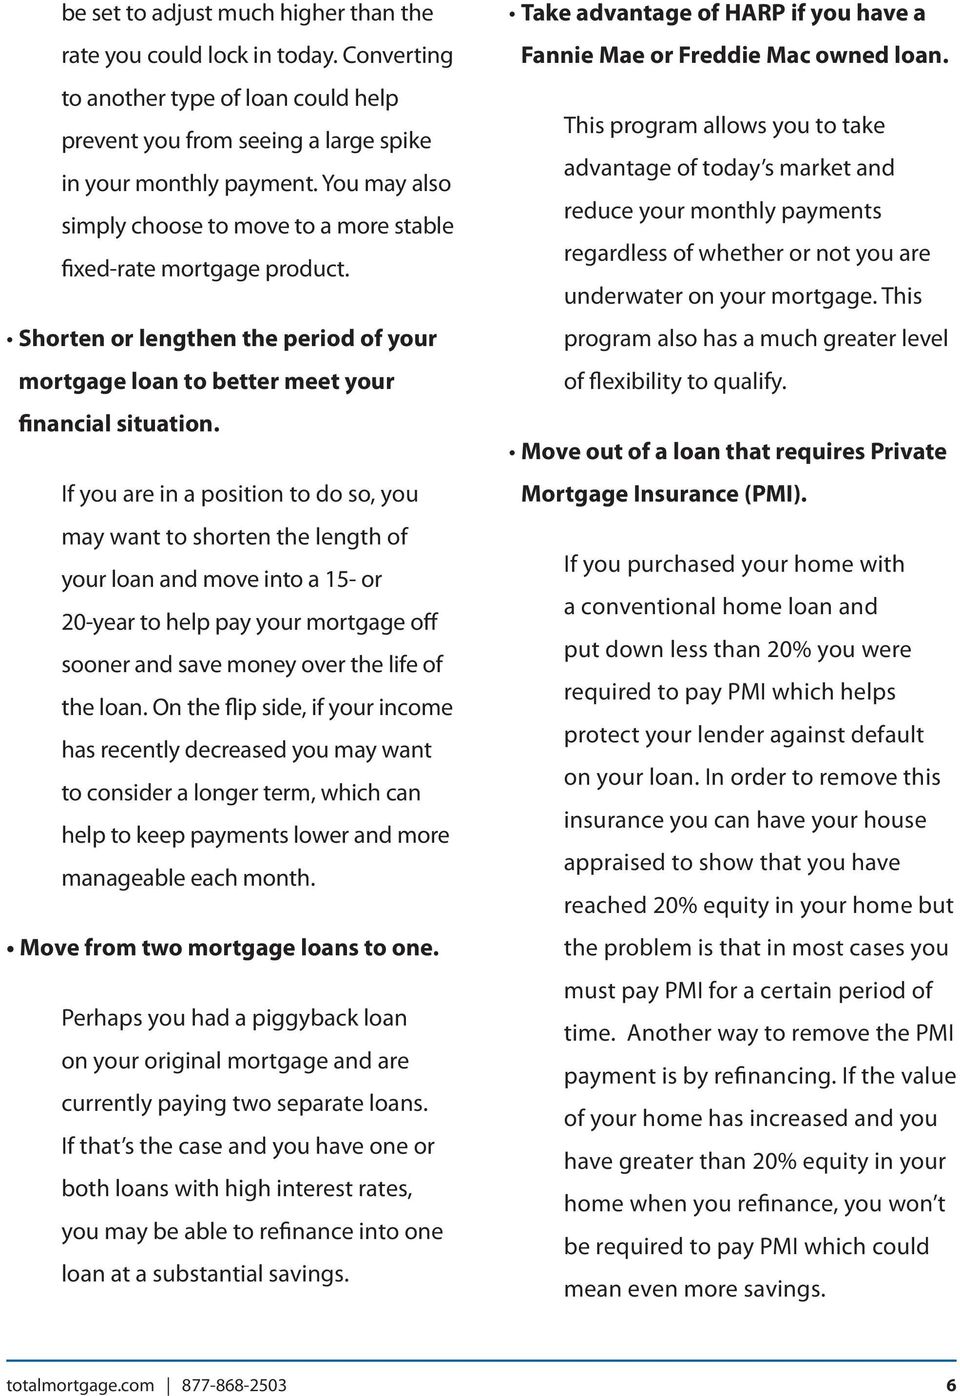 If you are in a position to do so, you may want to shorten the length of your loan and move into a 15- or 20-year to help pay your mortgage off sooner and save money over the life of the loan.